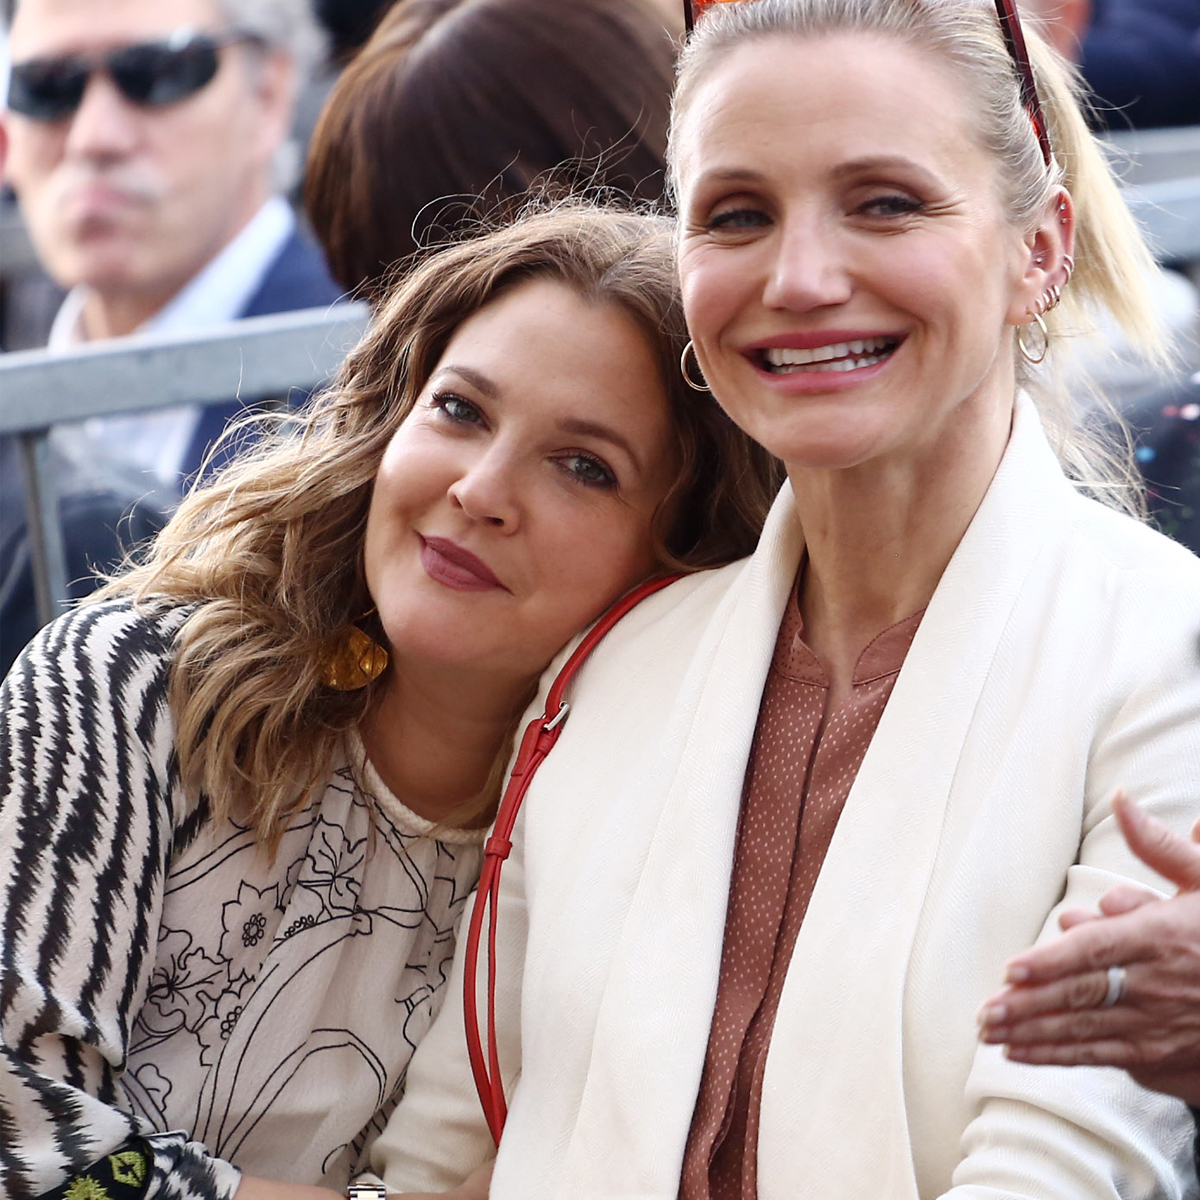 How Cameron Diaz Supported BFF Drew Barrymore Through “Difficult” Alcohol Struggle – E! Online